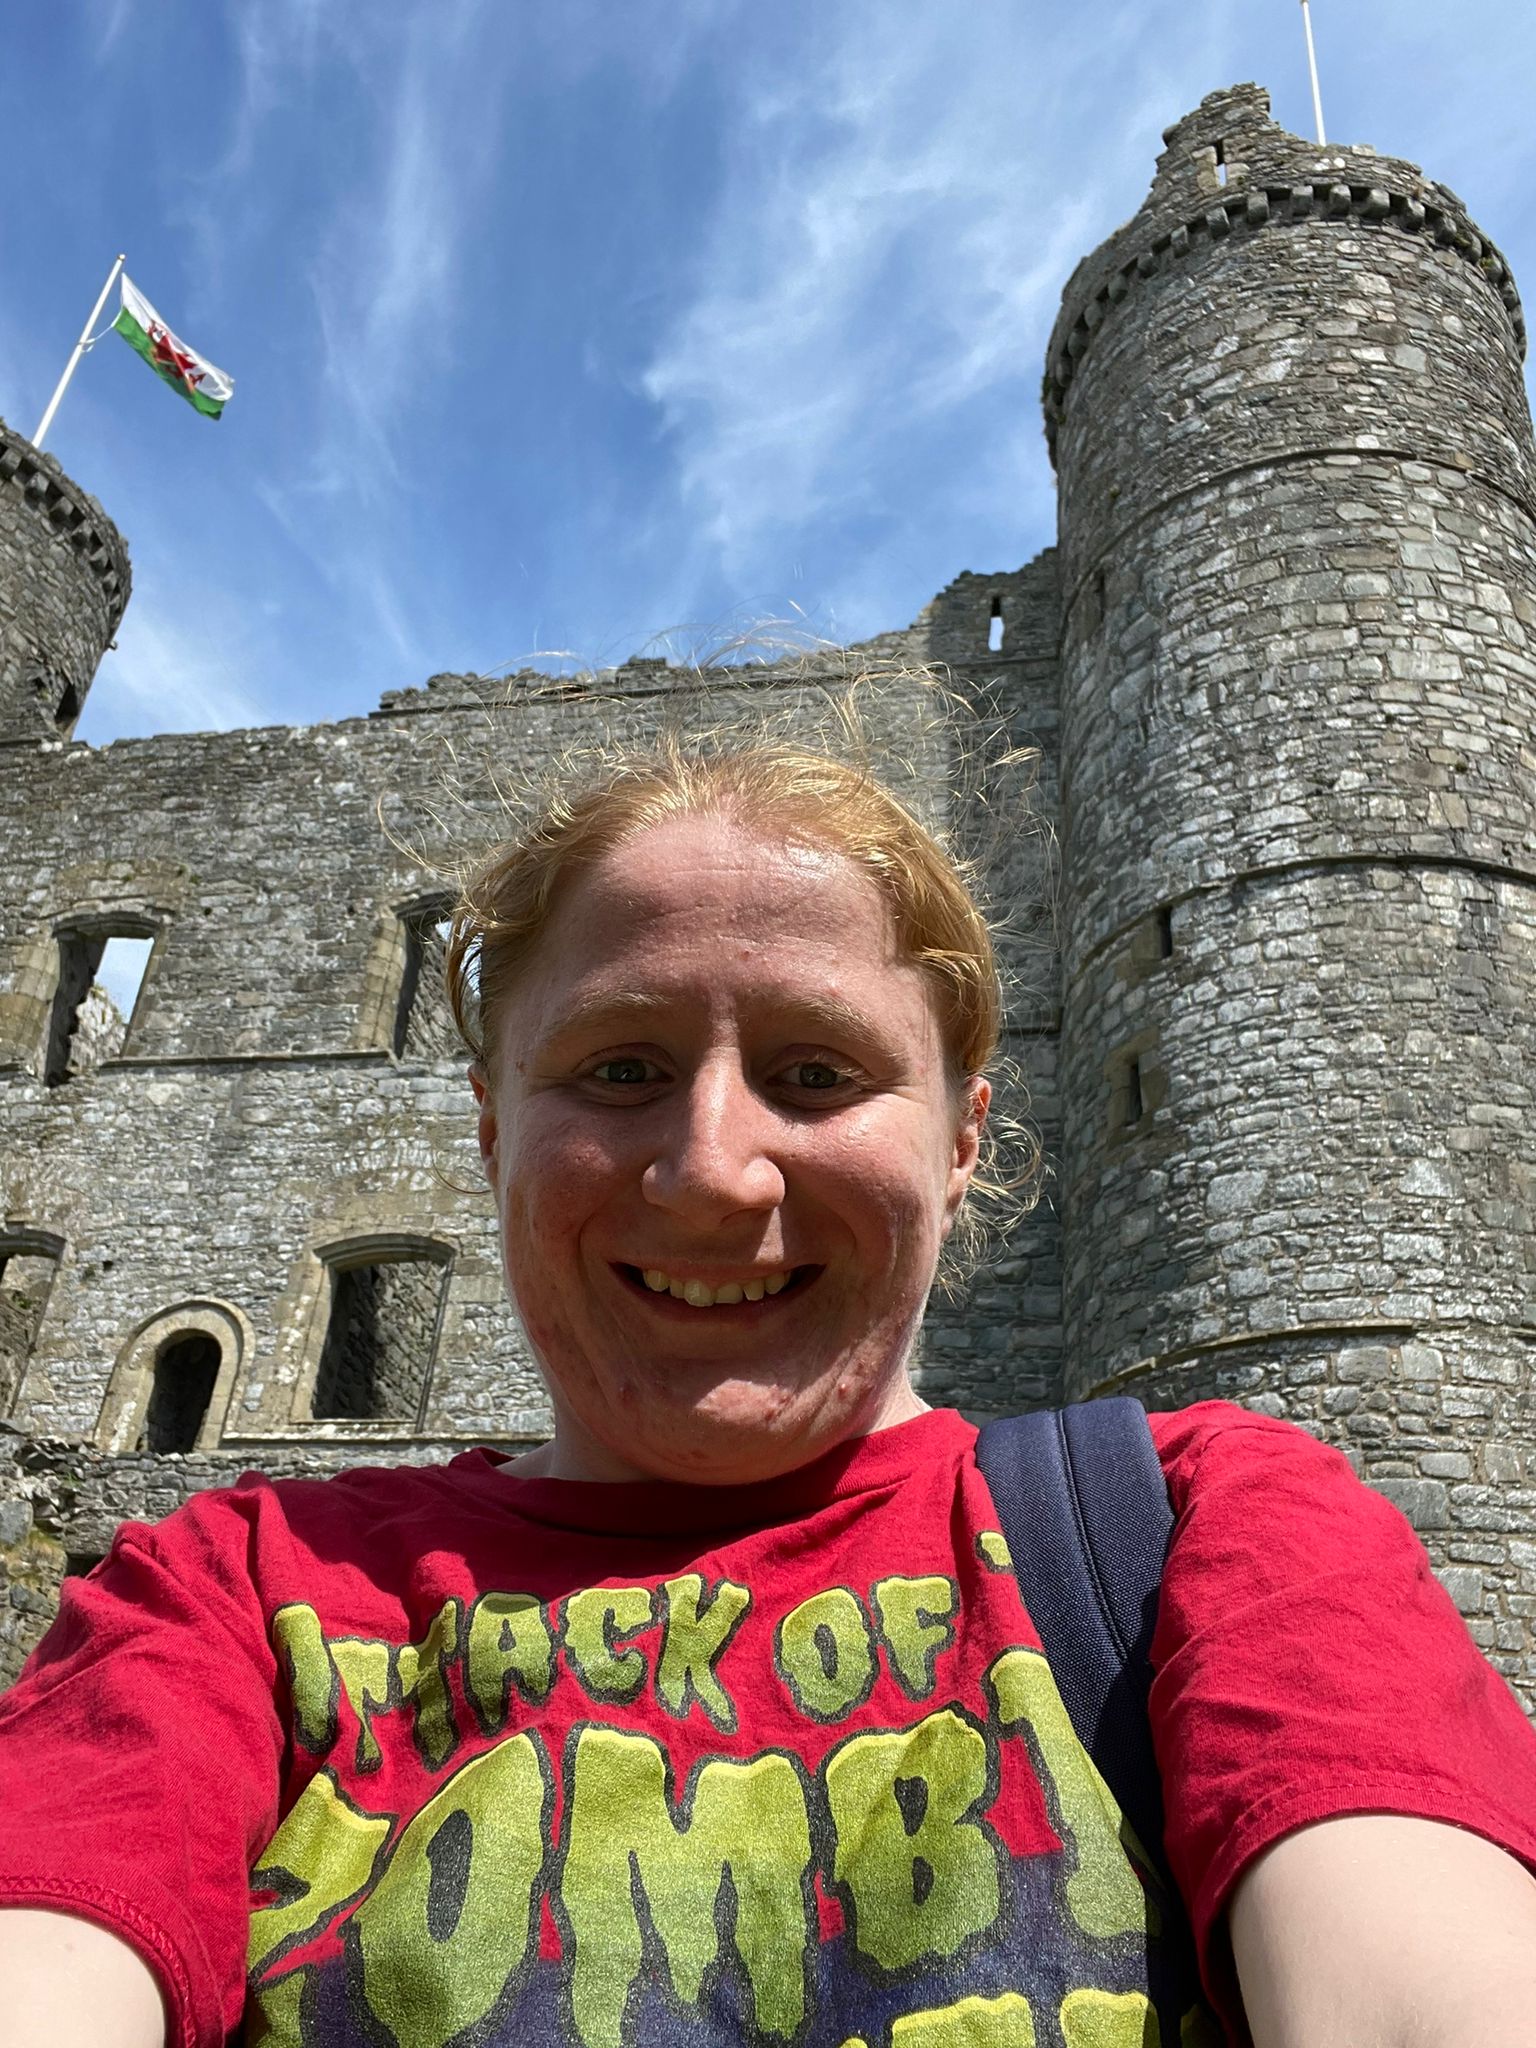 A woman in a red T-Shirt takes a selfie in front of a castle